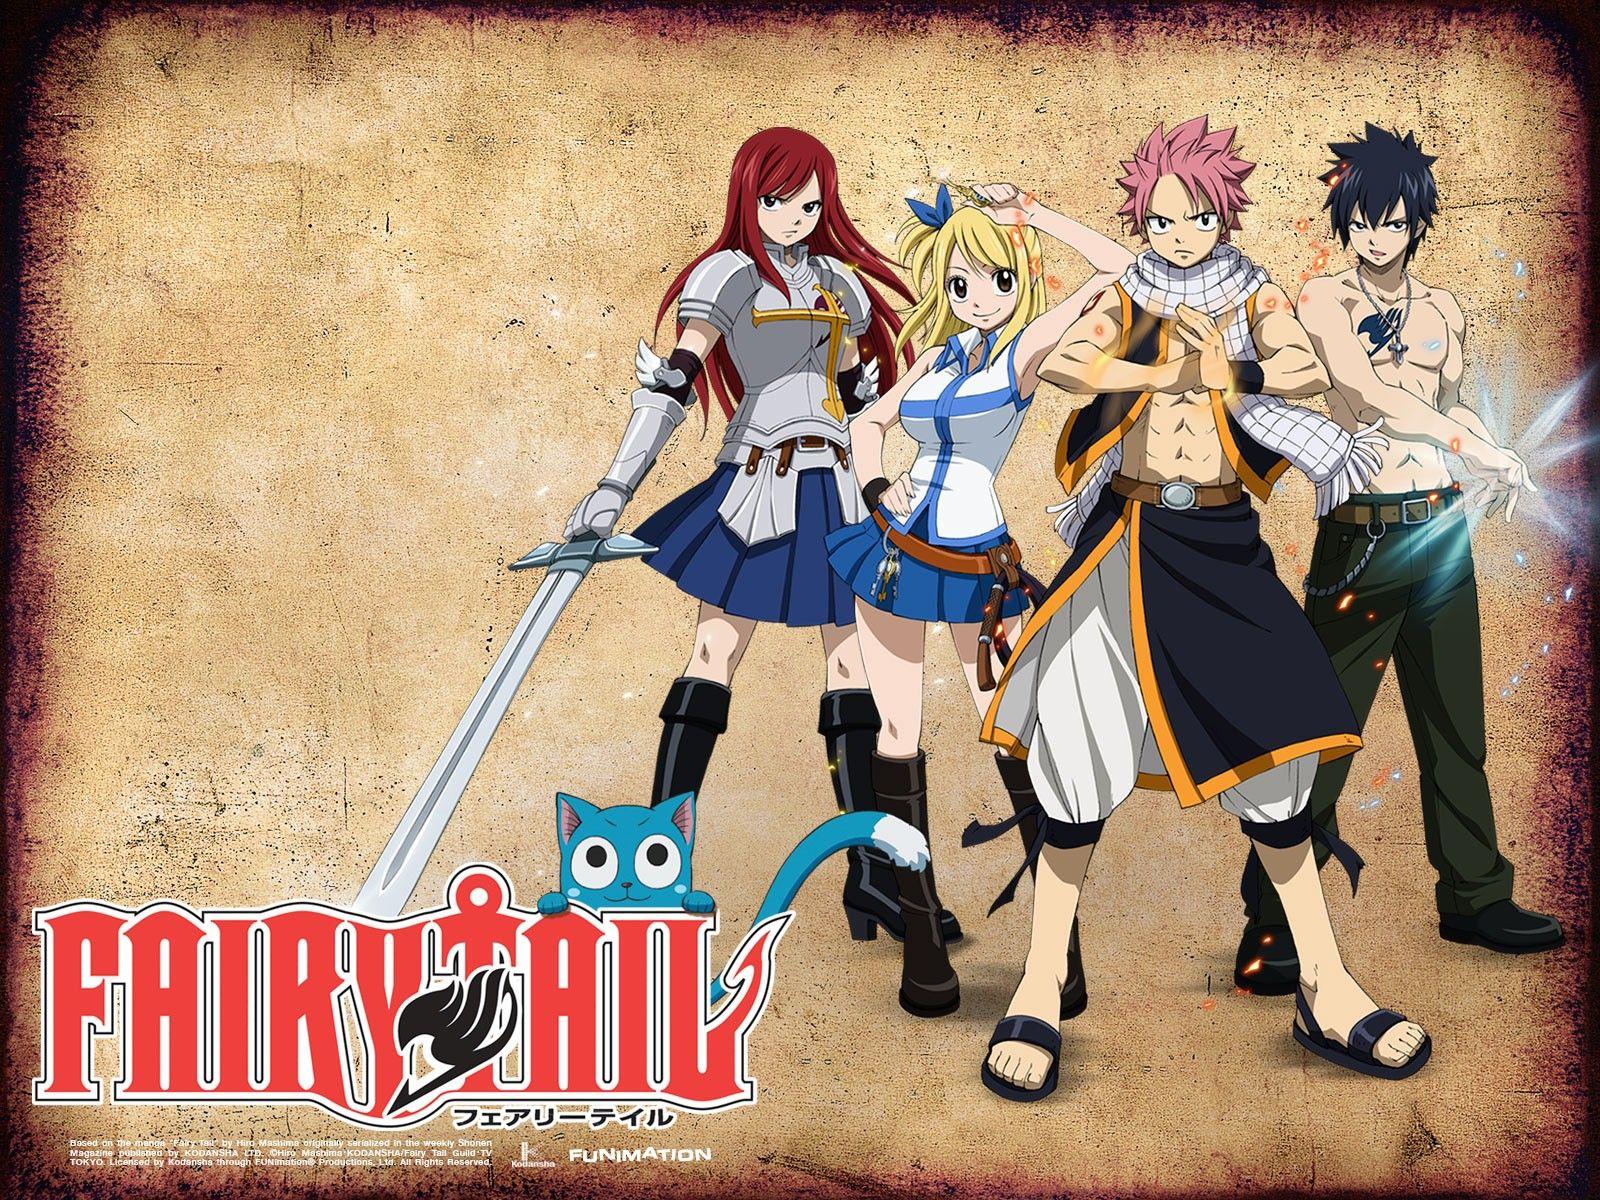 50+] Epic Fairy Tail Wallpapers